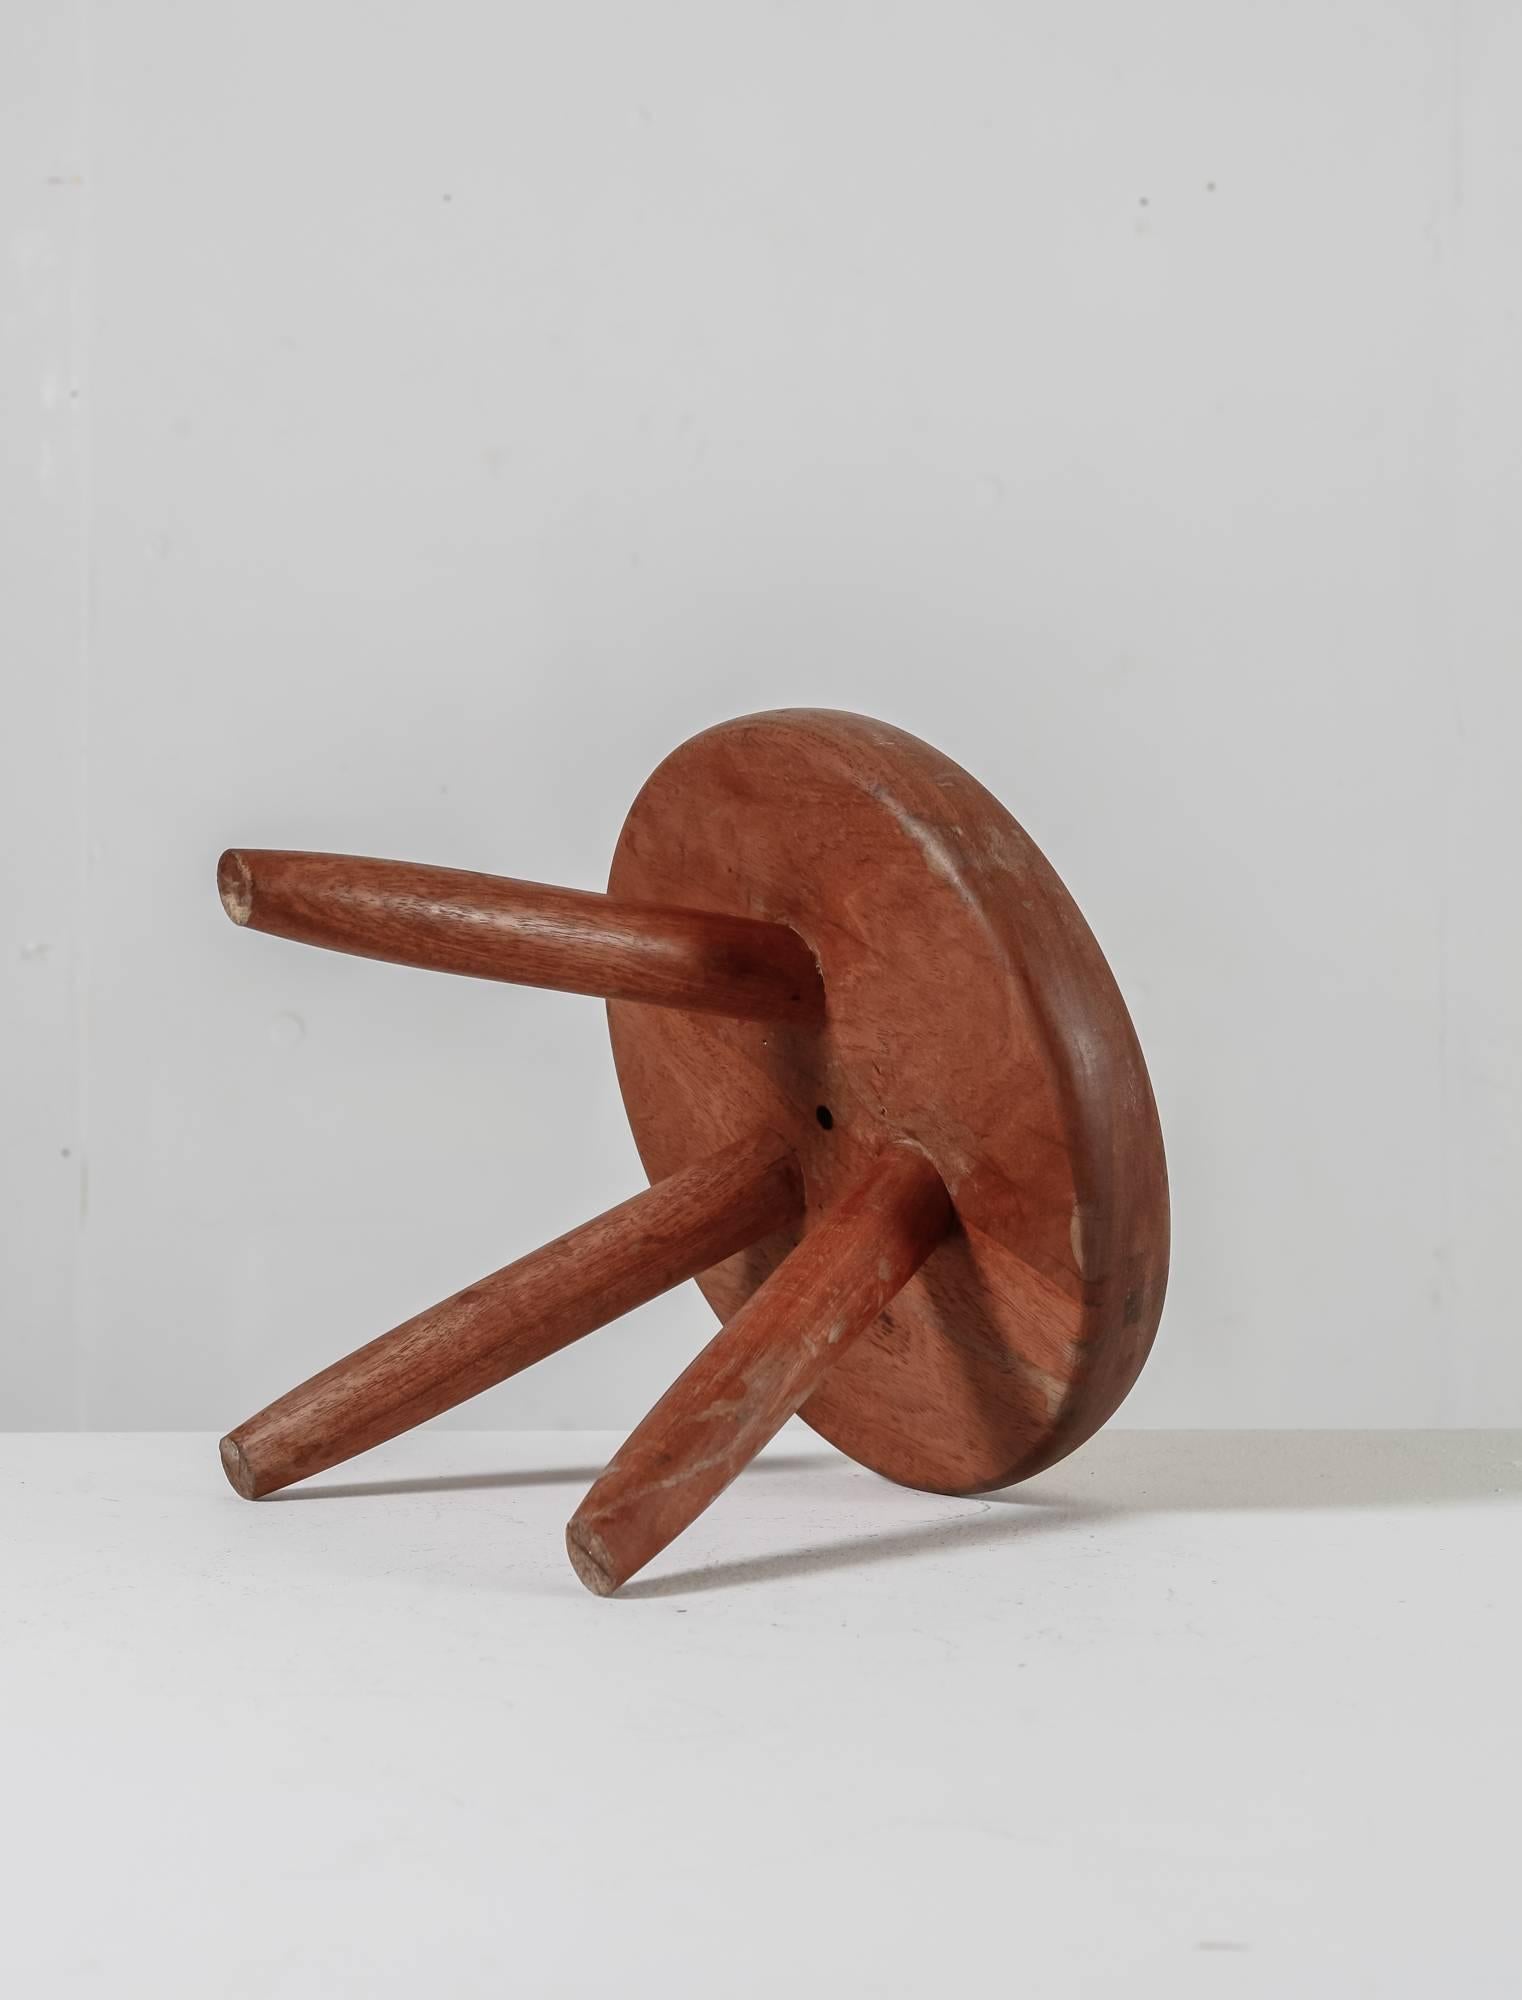 A low tripod stool by Charlotte Perriand in teak. The stool has beautiful wood connections and the teak has a great patina.